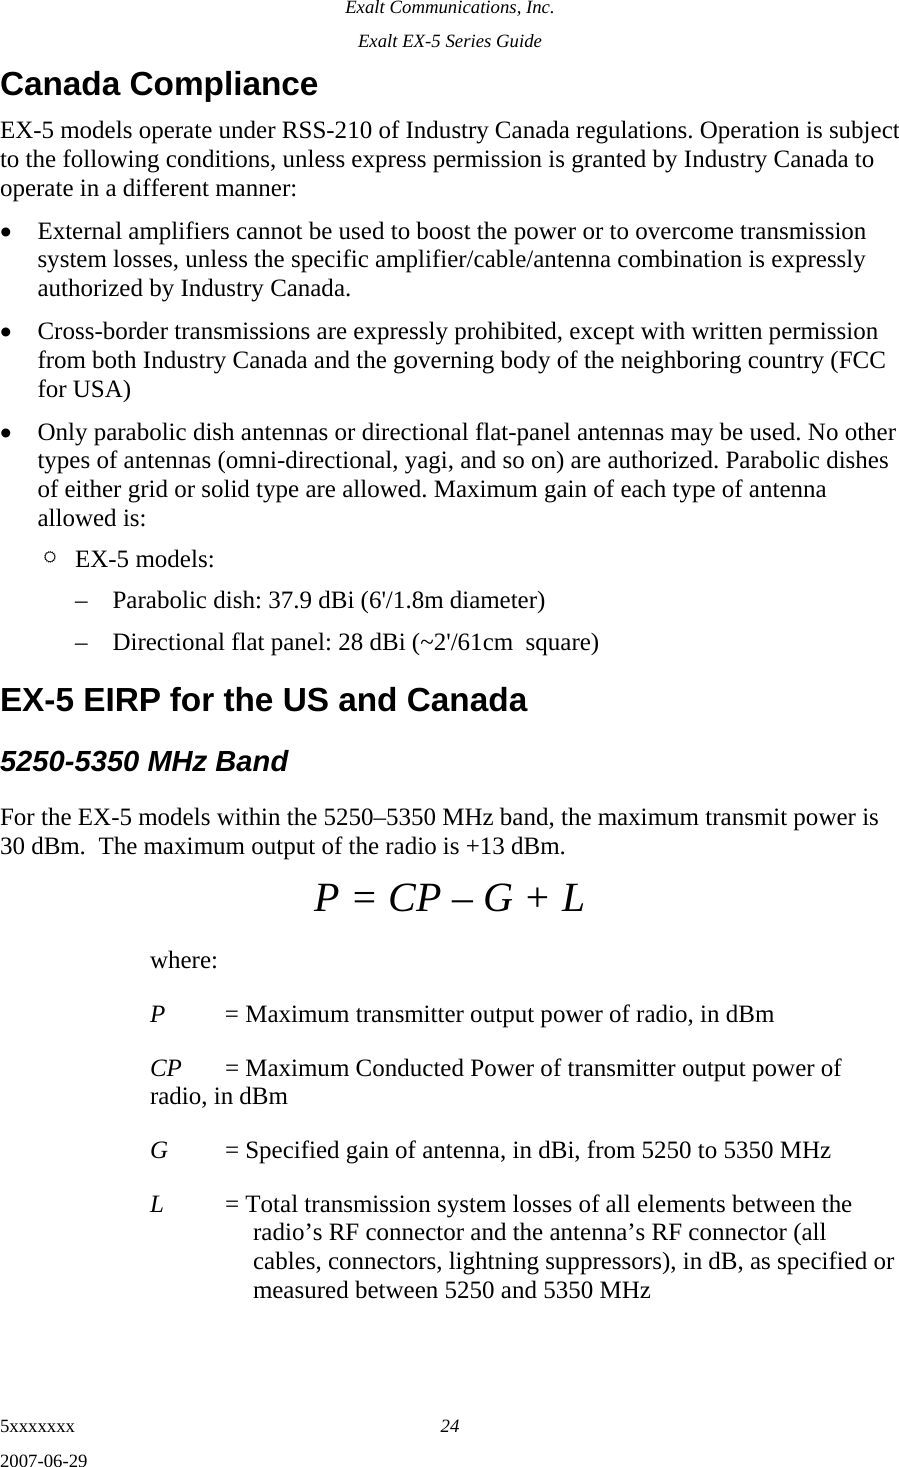 Exalt Communications, Inc. Exalt EX-5 Series Guide 5xxxxxxx  24 2007-06-29 Canada Compliance EX-5 models operate under RSS-210 of Industry Canada regulations. Operation is subject to the following conditions, unless express permission is granted by Industry Canada to operate in a different manner: • External amplifiers cannot be used to boost the power or to overcome transmission system losses, unless the specific amplifier/cable/antenna combination is expressly authorized by Industry Canada. • Cross-border transmissions are expressly prohibited, except with written permission from both Industry Canada and the governing body of the neighboring country (FCC for USA) • Only parabolic dish antennas or directional flat-panel antennas may be used. No other types of antennas (omni-directional, yagi, and so on) are authorized. Parabolic dishes of either grid or solid type are allowed. Maximum gain of each type of antenna allowed is: ¶ EX-5 models: – Parabolic dish: 37.9 dBi (6&apos;/1.8m diameter) – Directional flat panel: 28 dBi (~2&apos;/61cm  square) EX-5 EIRP for the US and Canada 5250-5350 MHz Band For the EX-5 models within the 5250–5350 MHz band, the maximum transmit power is 30 dBm.  The maximum output of the radio is +13 dBm. P = CP – G + L where: P  = Maximum transmitter output power of radio, in dBm CP  = Maximum Conducted Power of transmitter output power of radio, in dBm G  = Specified gain of antenna, in dBi, from 5250 to 5350 MHz L  = Total transmission system losses of all elements between the radio’s RF connector and the antenna’s RF connector (all cables, connectors, lightning suppressors), in dB, as specified or measured between 5250 and 5350 MHz 